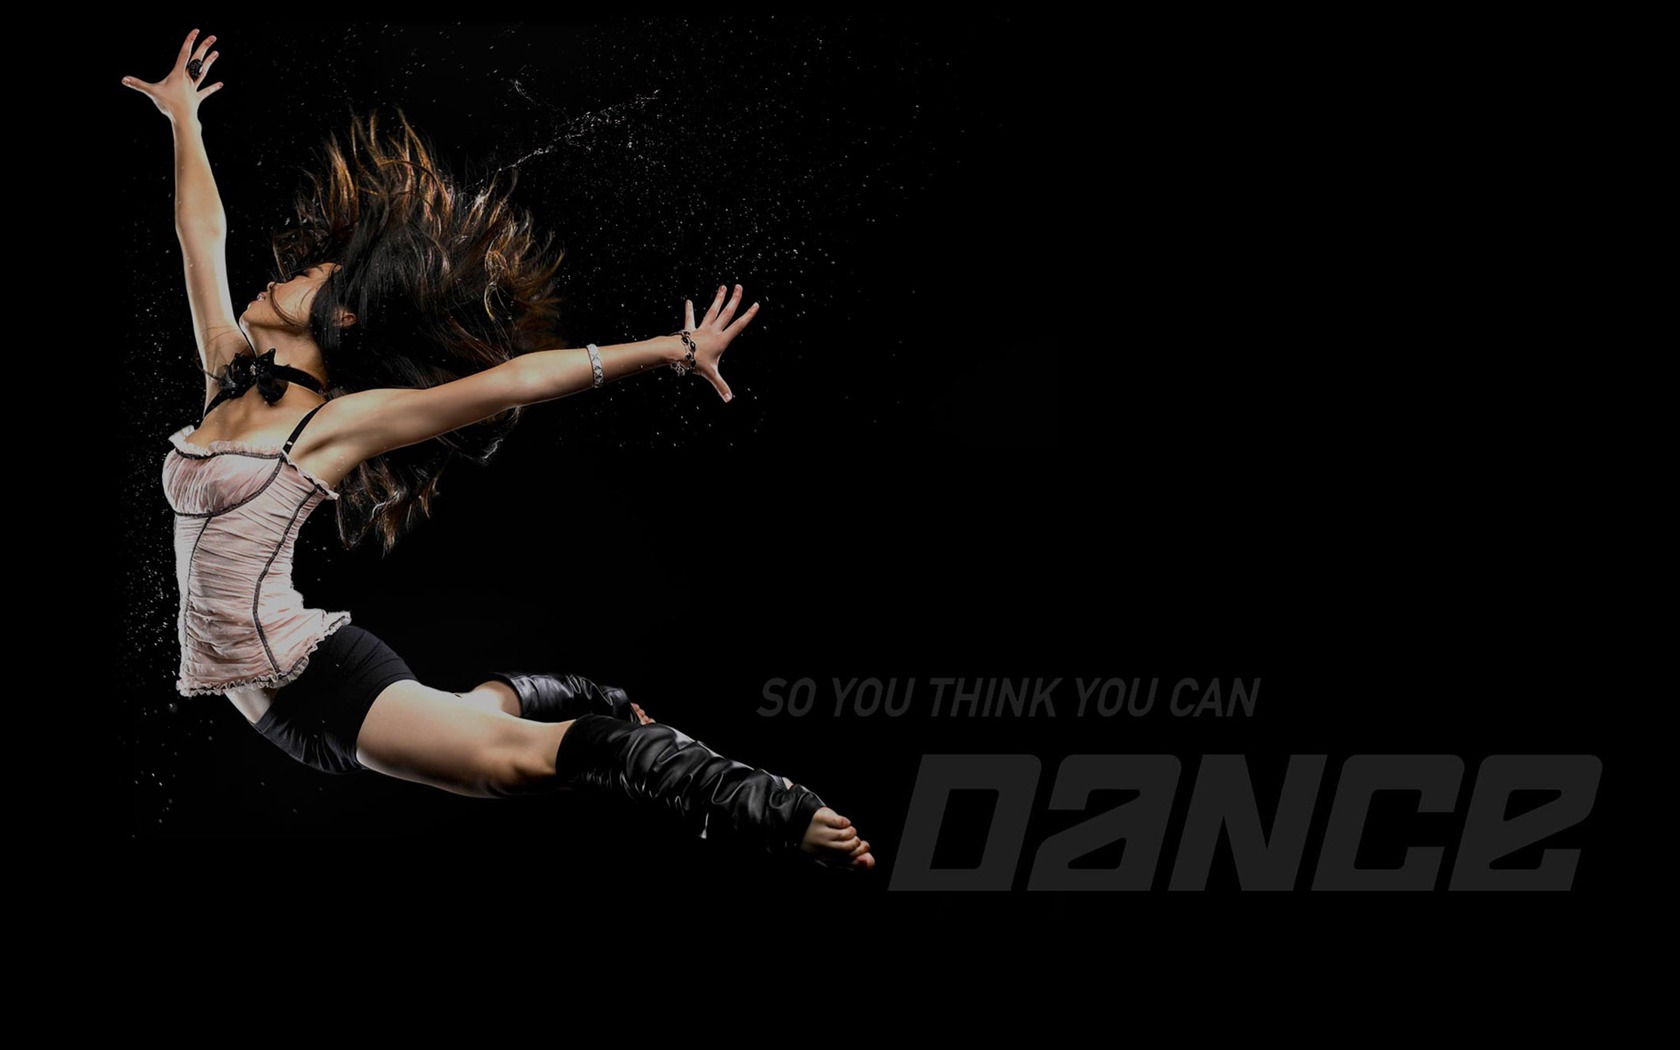 So You Think You Can Dance 舞林争霸 壁纸(一)1 - 1680x1050